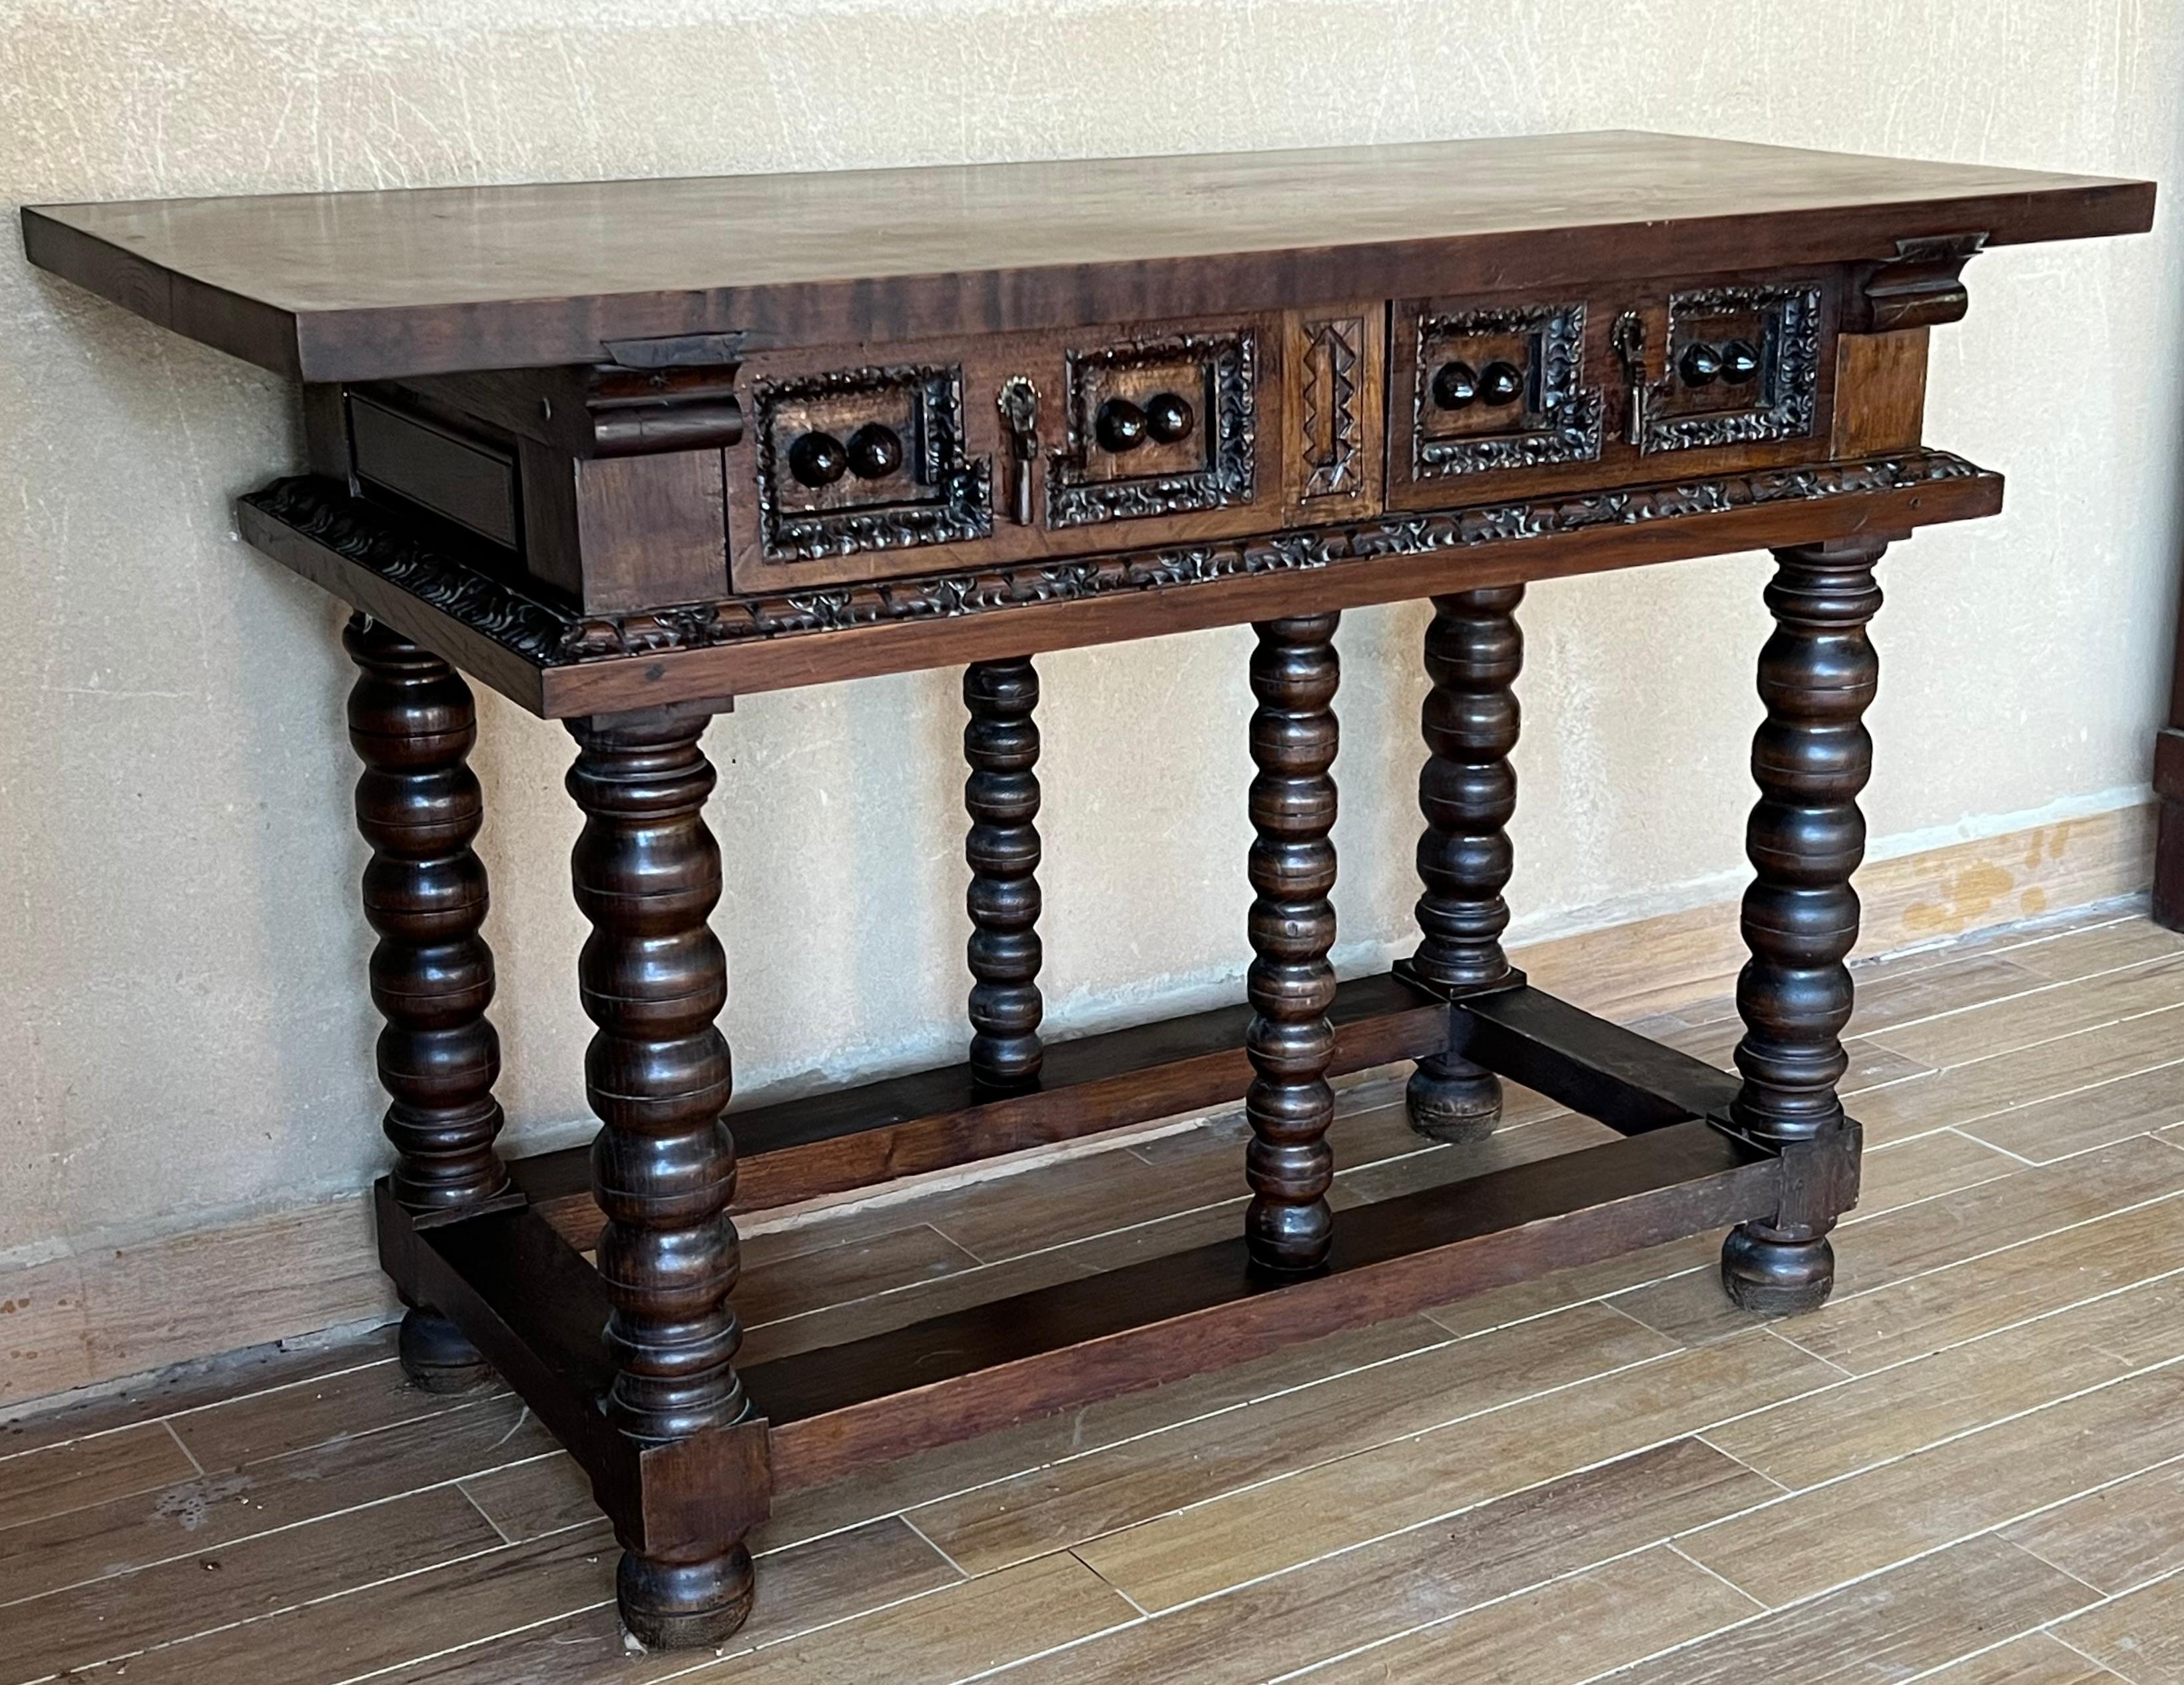 This large Spanish late 19th century features a beautiful one plank rectangular top over two richly carved drawers. Each drawer, featuring slightly different hardware, is adorned with floral motifs. Rosettes are carved around the drawers and each